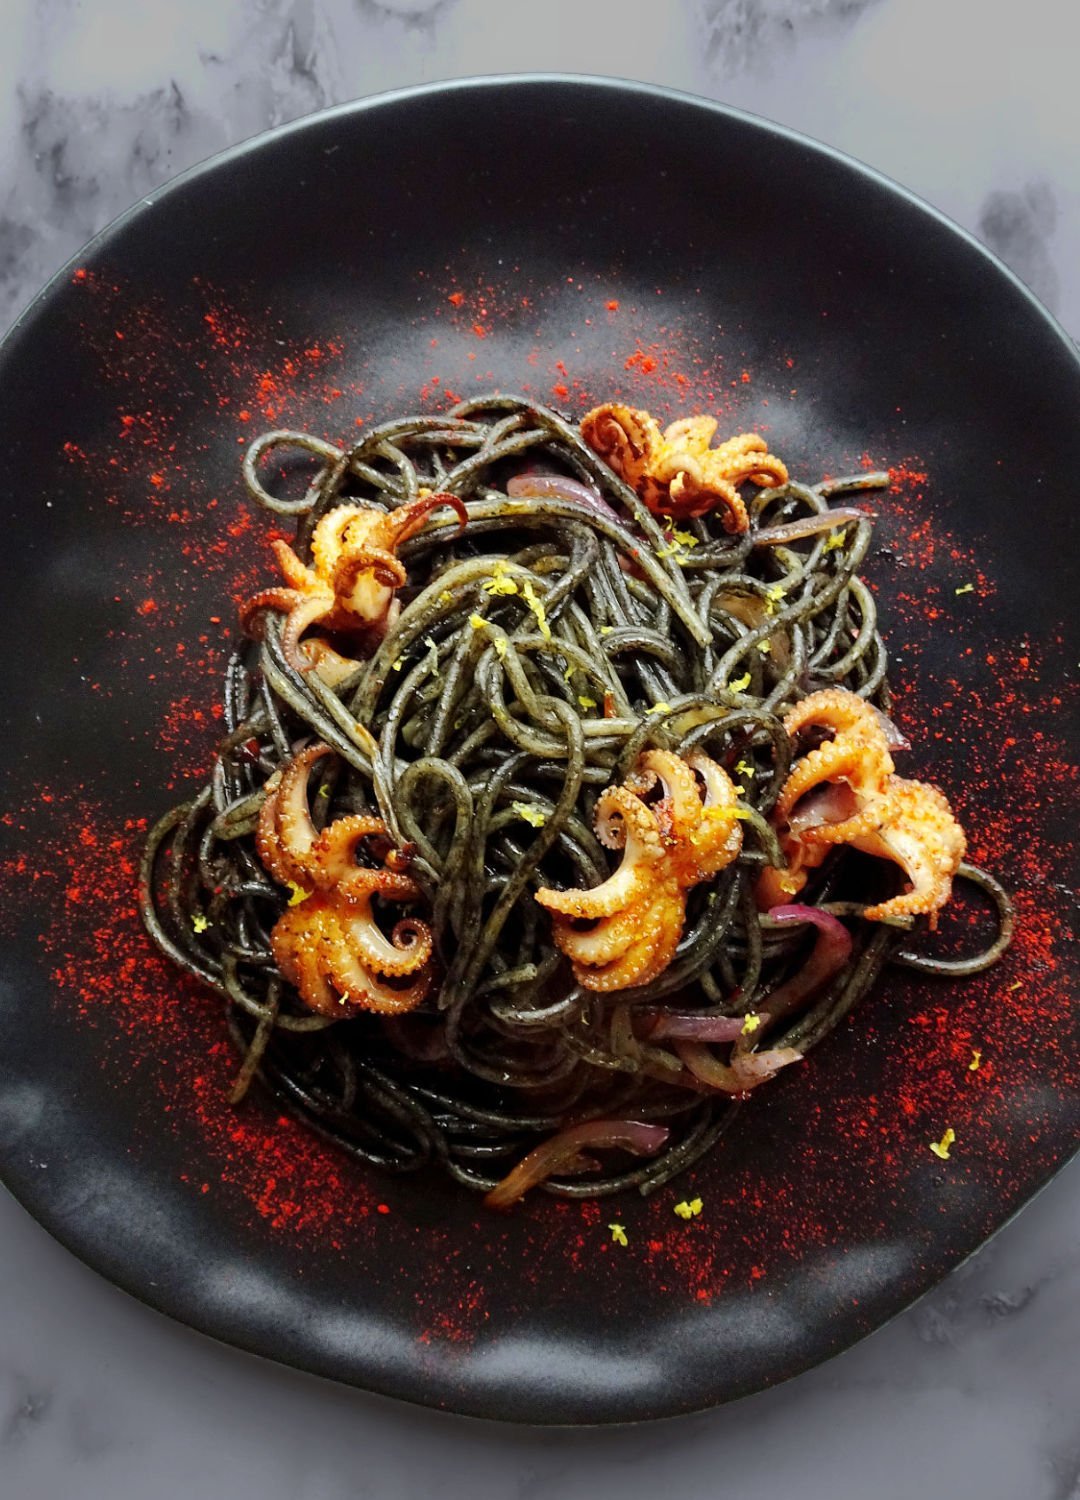 a black plate sits on a granite bechtop filled with black squid ink pasta and garnished with red baby octopus.